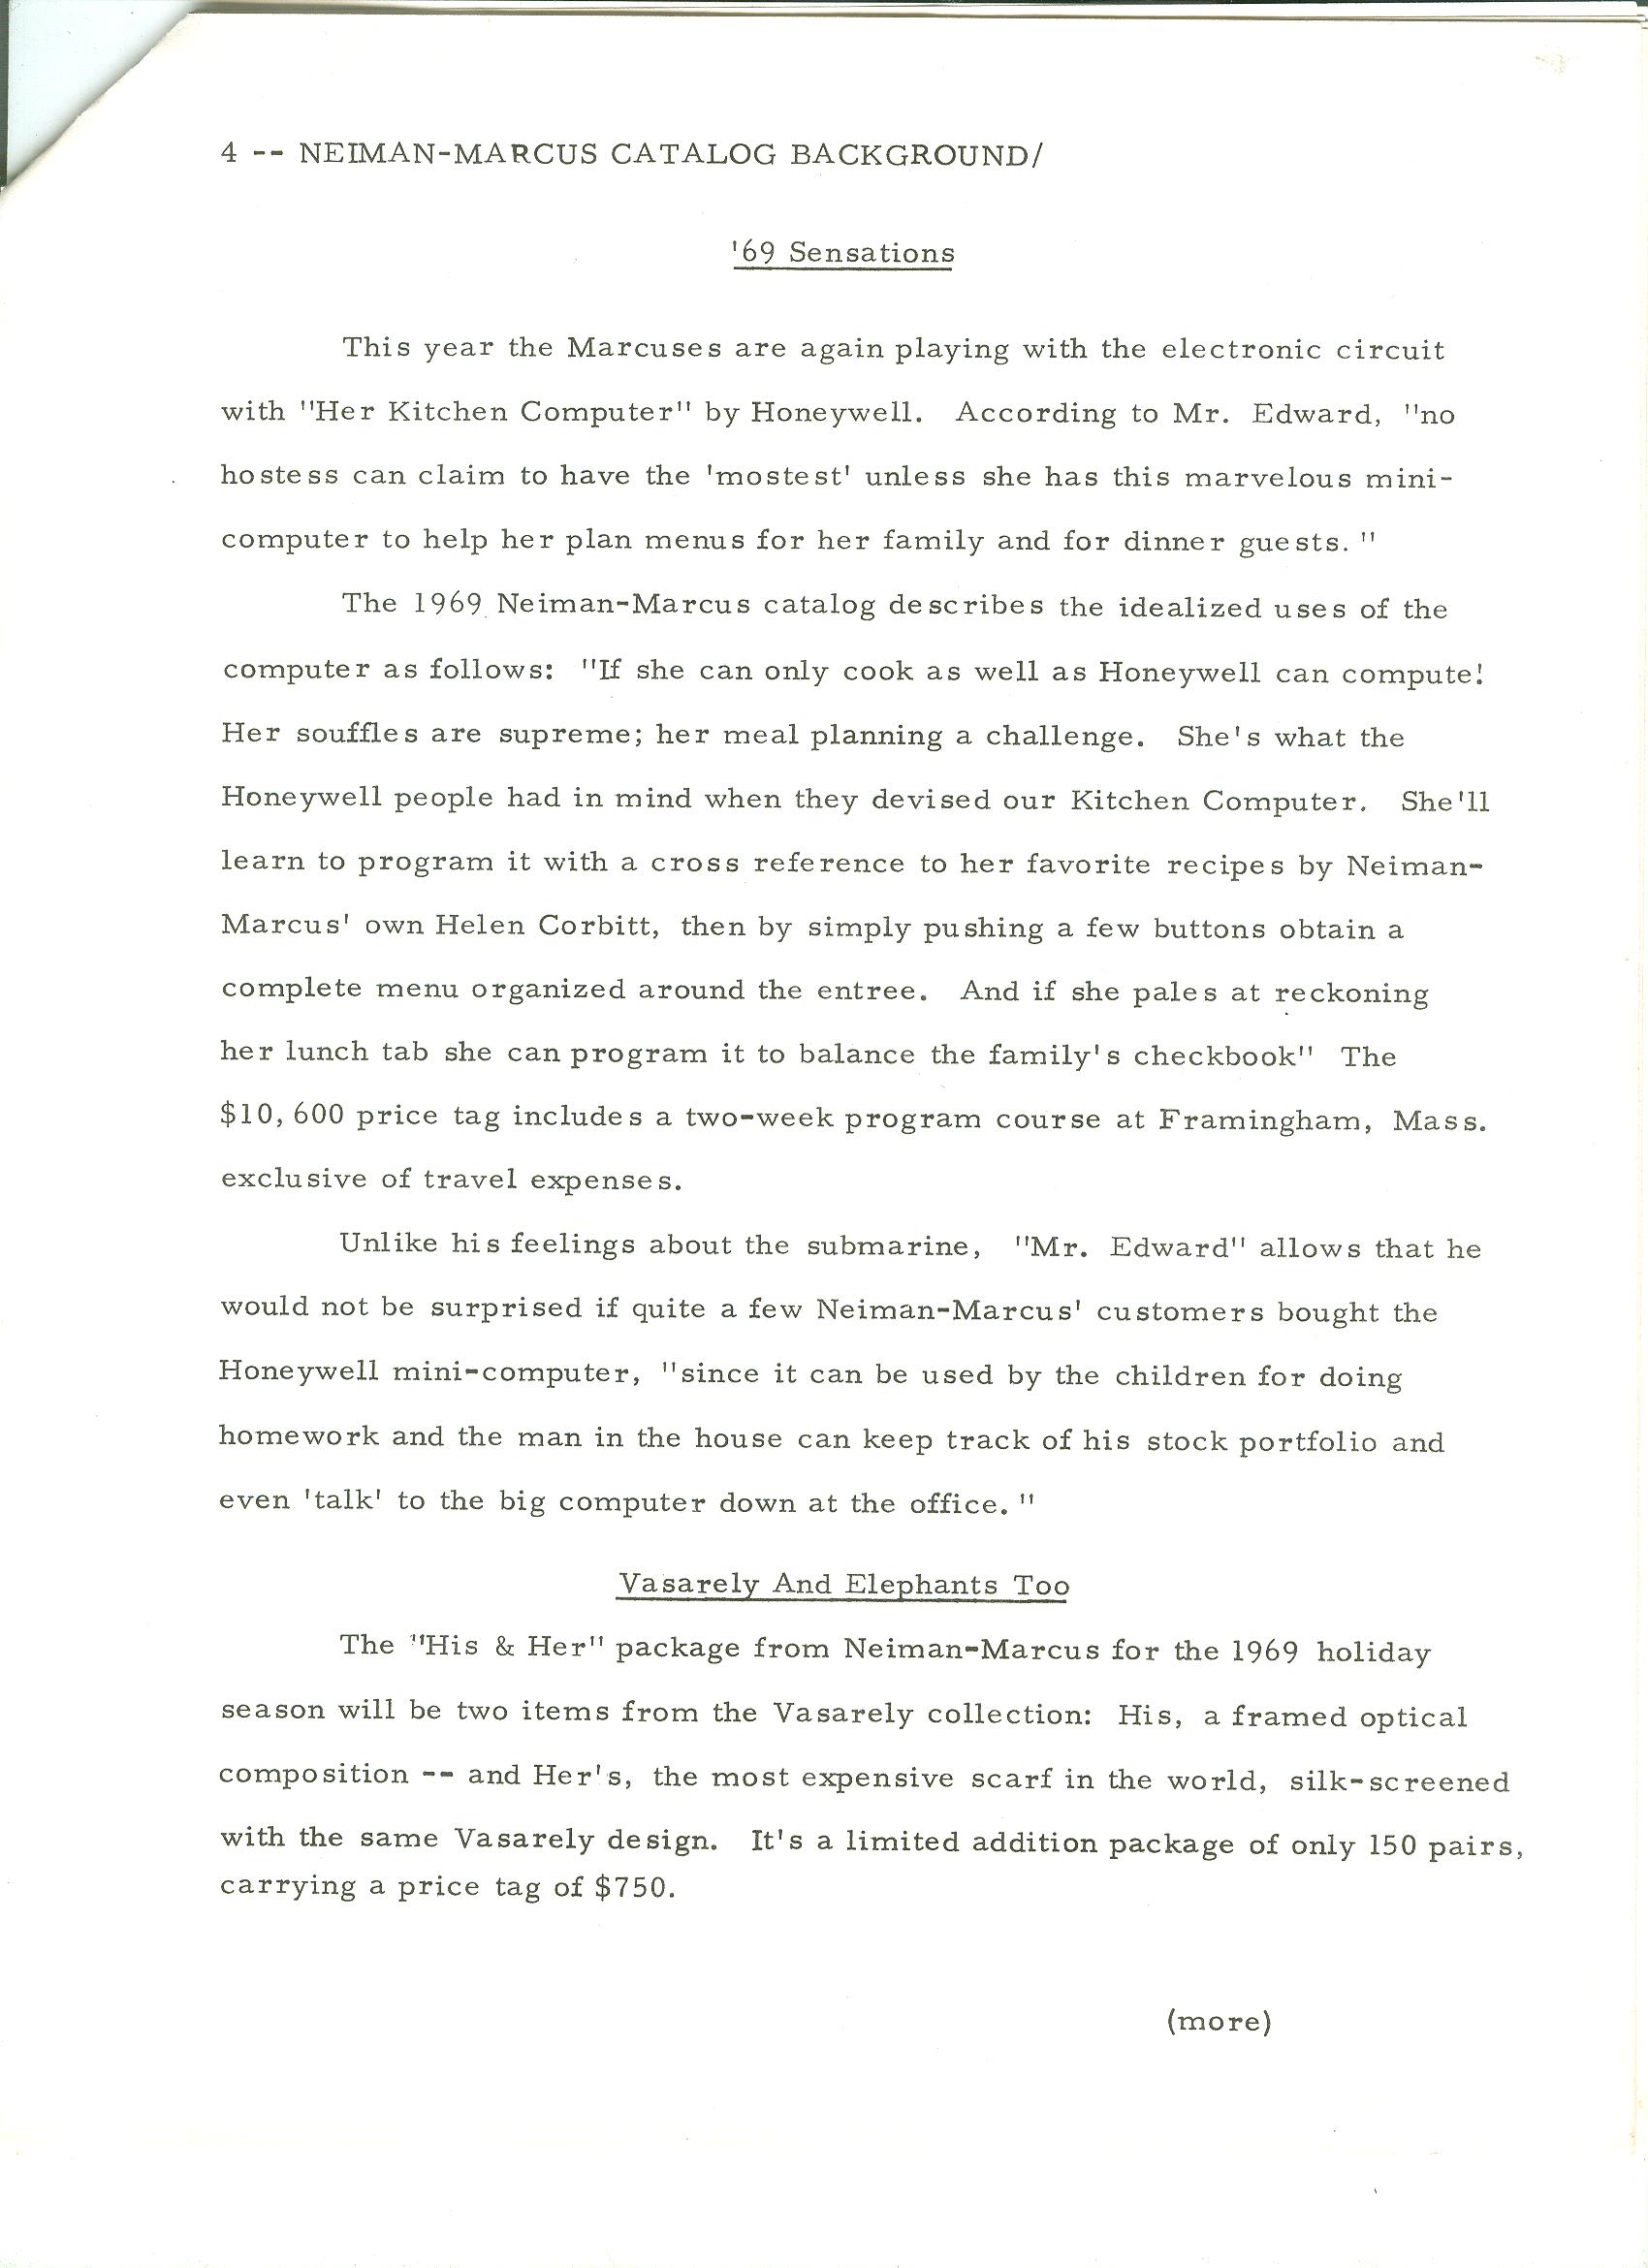  image of Press release for the Kitchen Computer (Honeywell 316) 